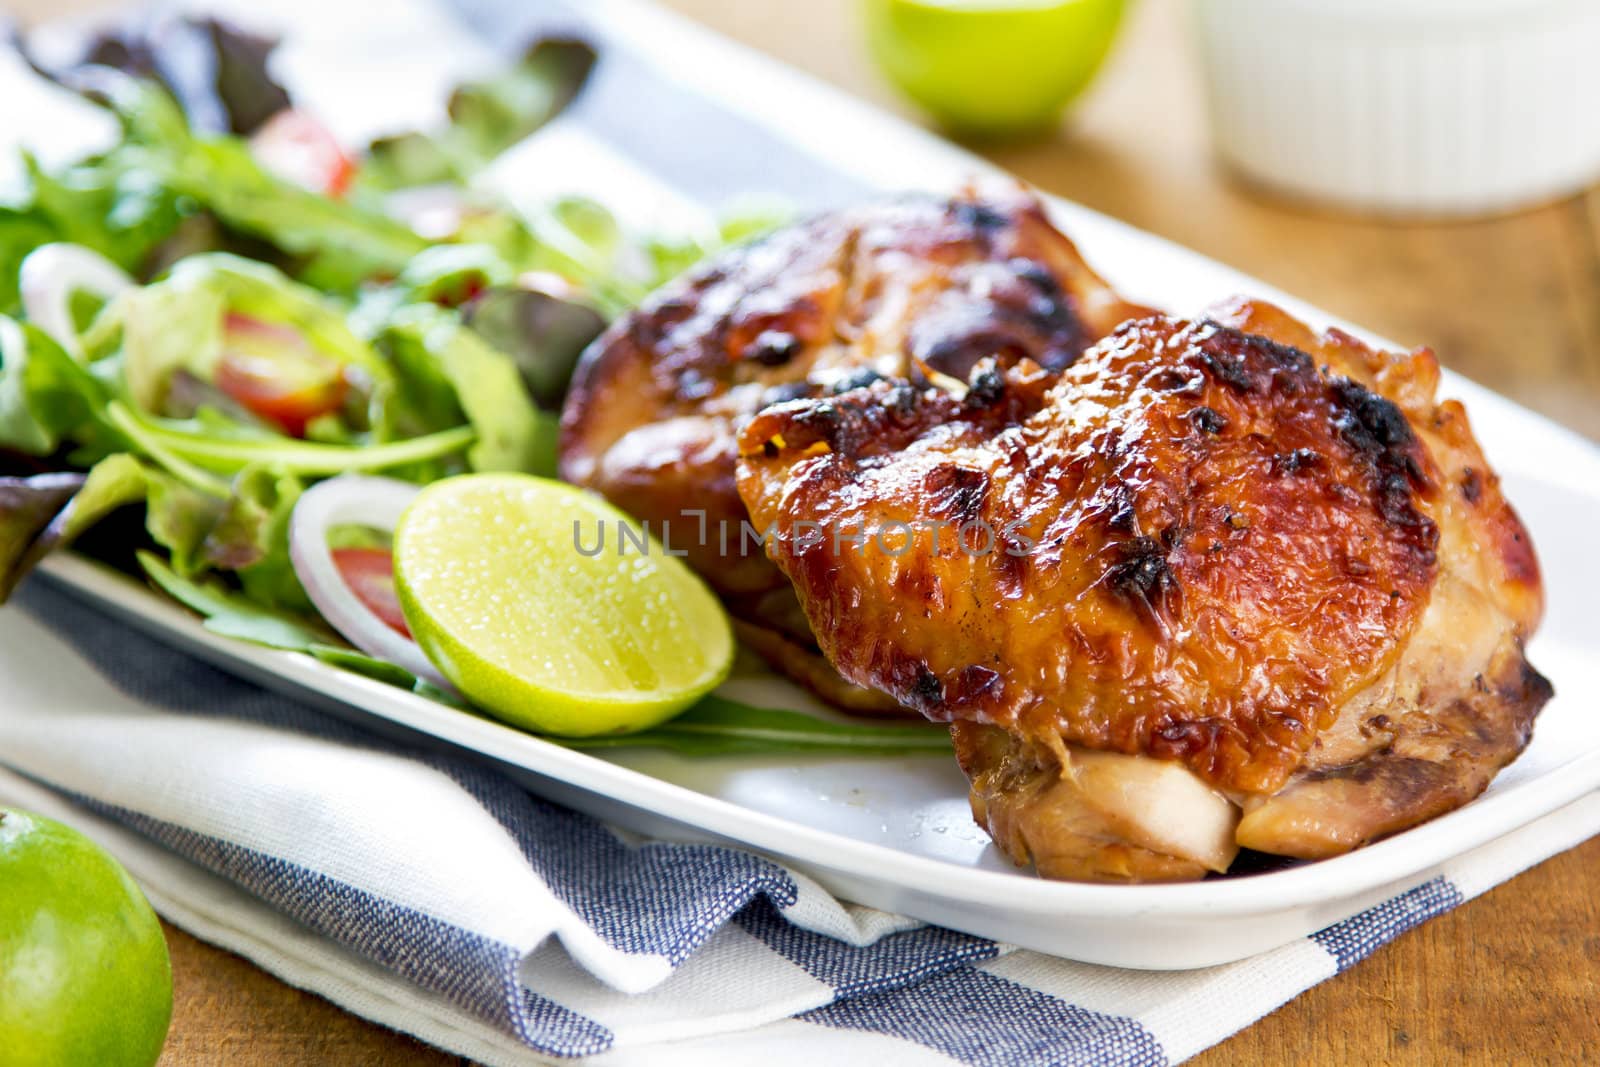 Grilled chicken with lettuce and rocket salad by sour cream dressing